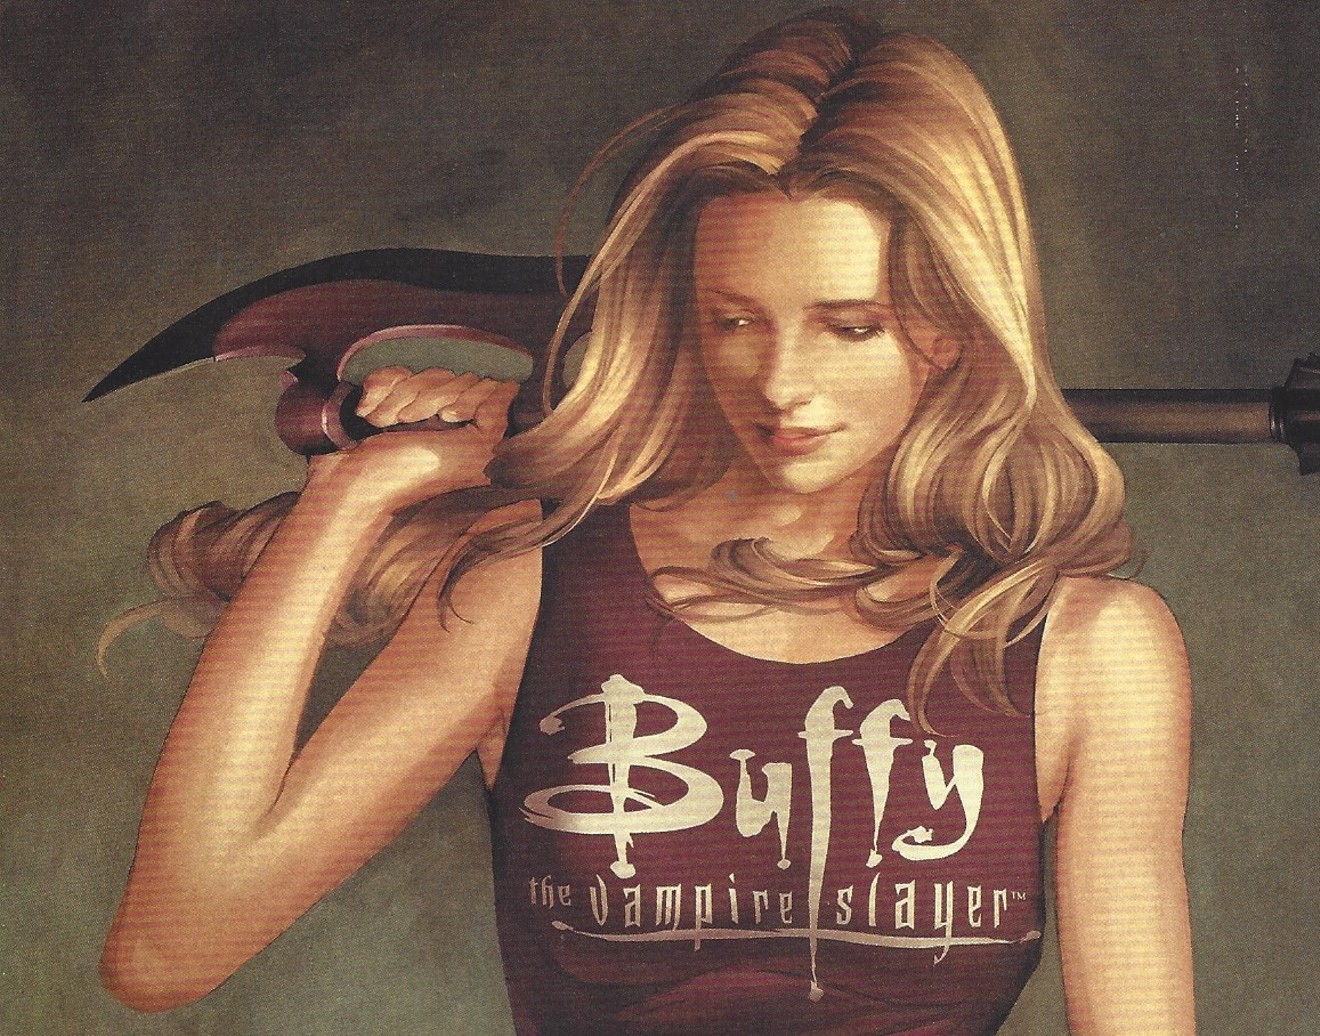 Buffy Season 8 showed what Joss Whedon would do if he didn't have to worry about actors.